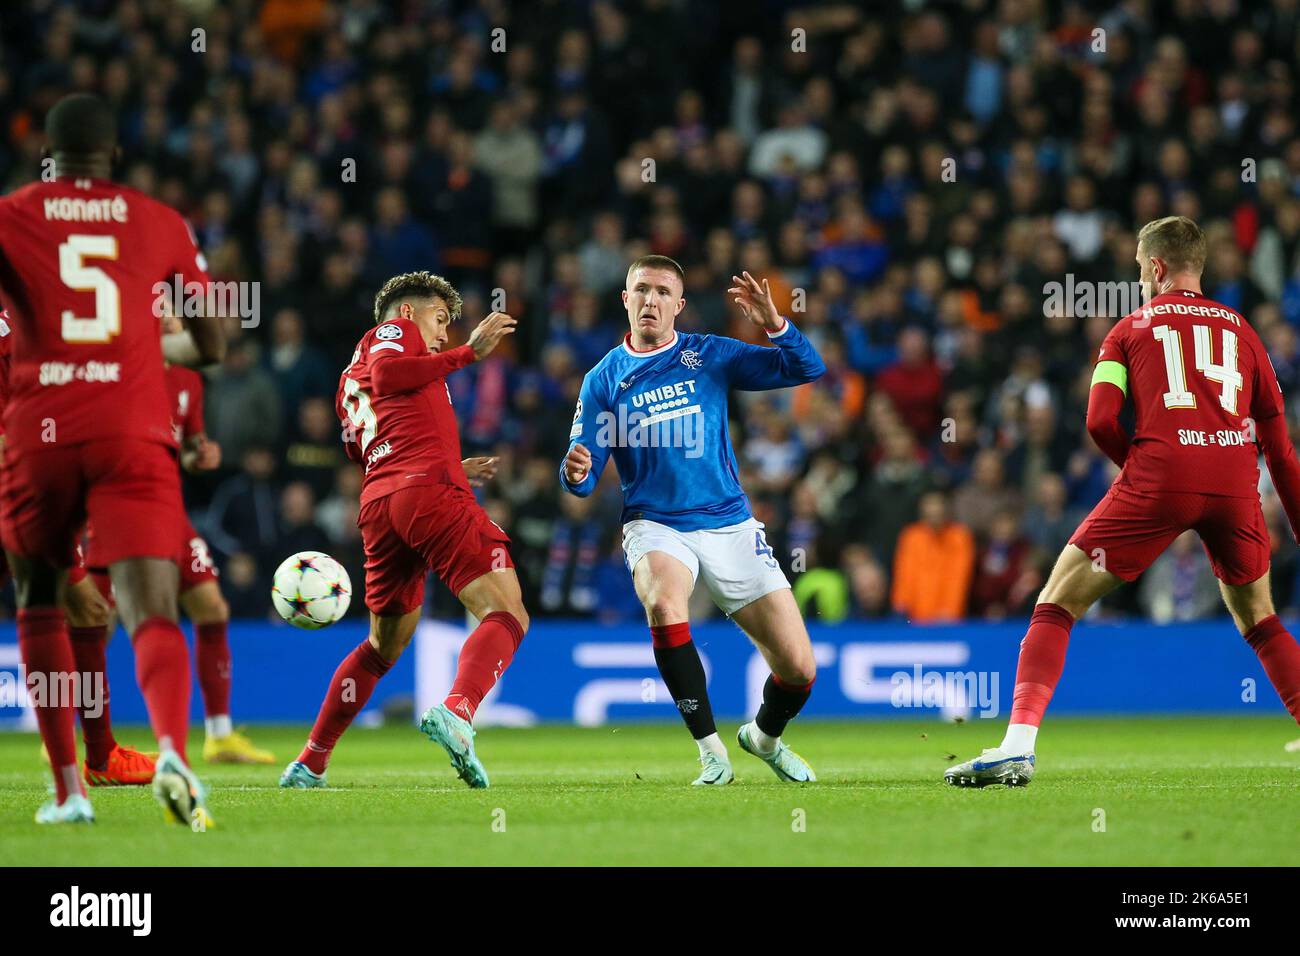 Glasgow, UK. 12th Oct, 2022. In the second game of the group stages of the Champions League, between these two teams Rangers FC play Liverpool FC at Ibrox, Rangers home stadium in Glasgow. The first game between these two teams in the Champions League, Liverpool won 2 - 0. Credit: Findlay/Alamy Live News Stock Photo